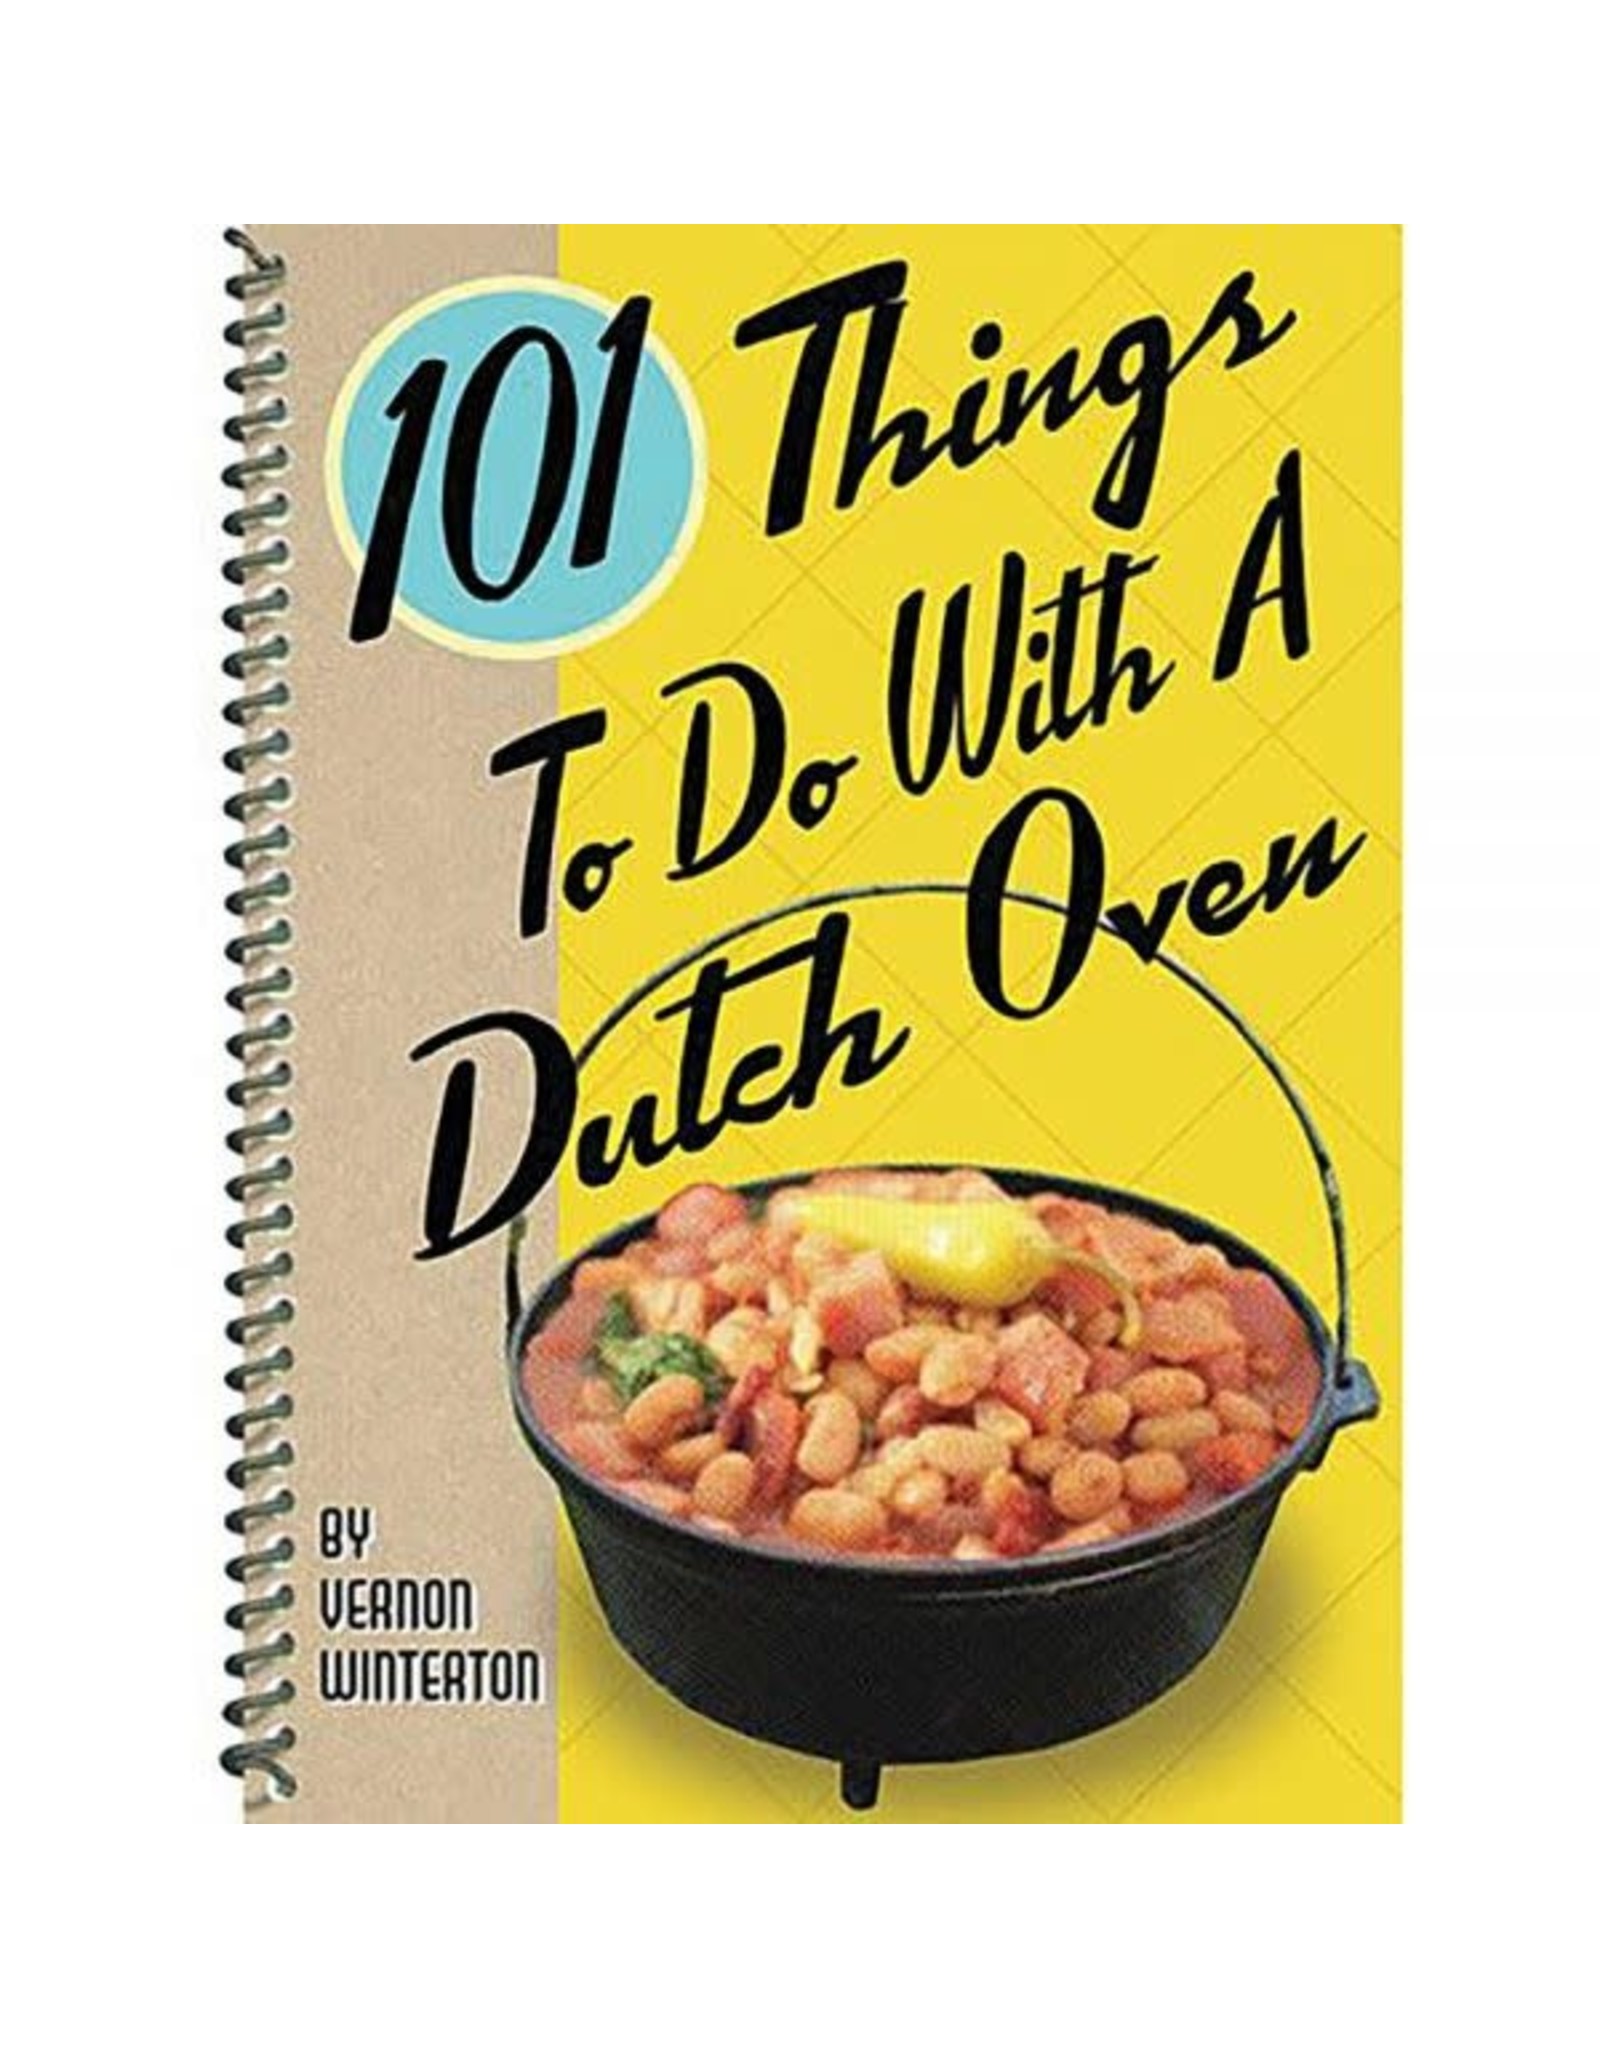 101 Things To Do w/ Dutch Oven by Vernon Winterton